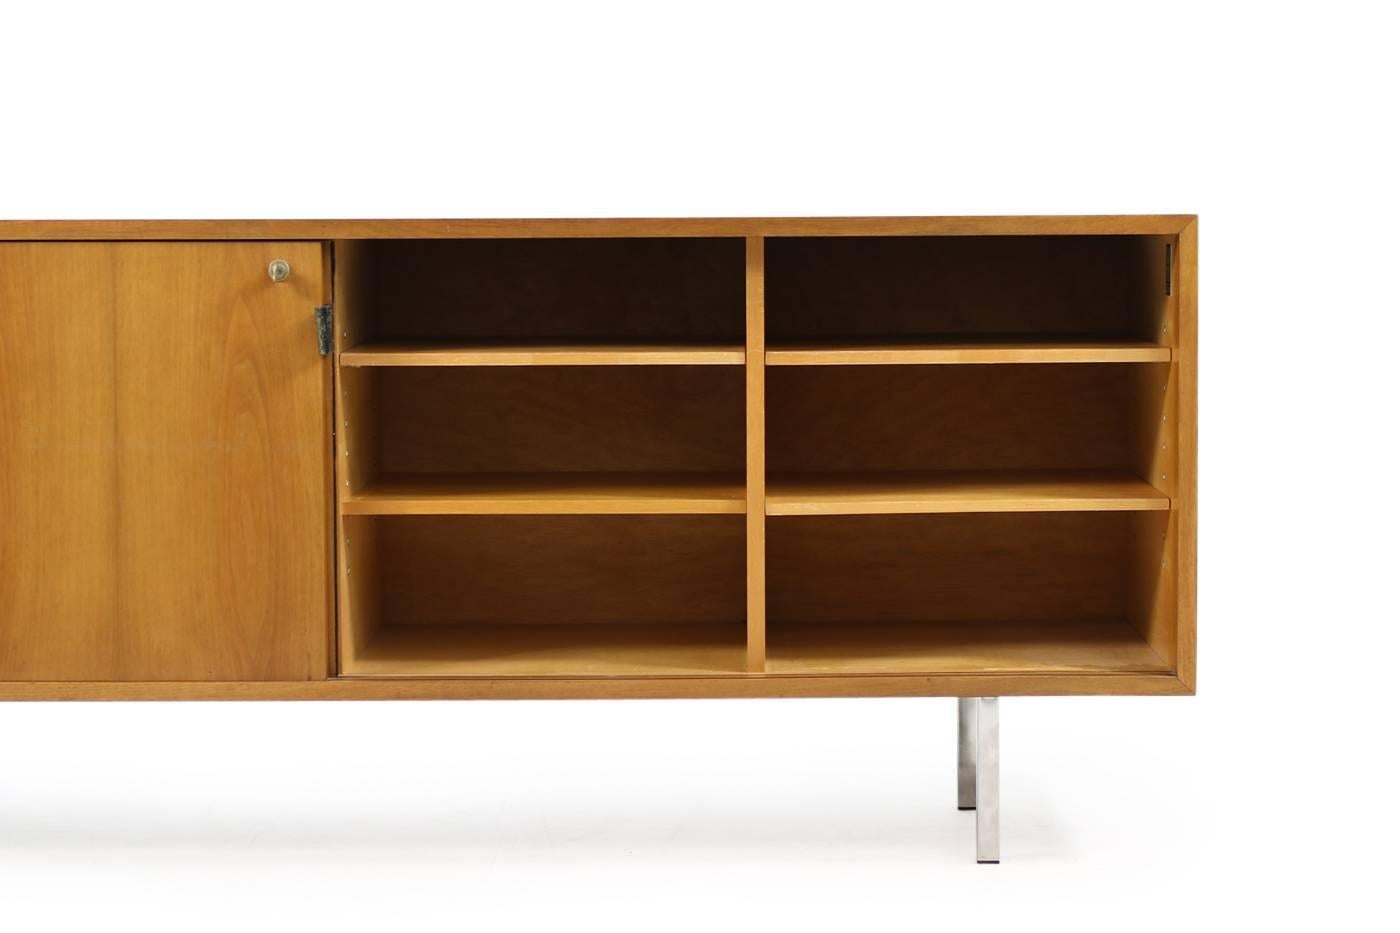 Beautiful, original and authentic Florence Knoll Sideboard Mod. 116 for Knoll International, manufactured for Wohnbedarf S.A Switzerland in the 1950s
Fantastic authentic condition, adjustable shelves inside, cherrywood and maplewood. Chrome legs,